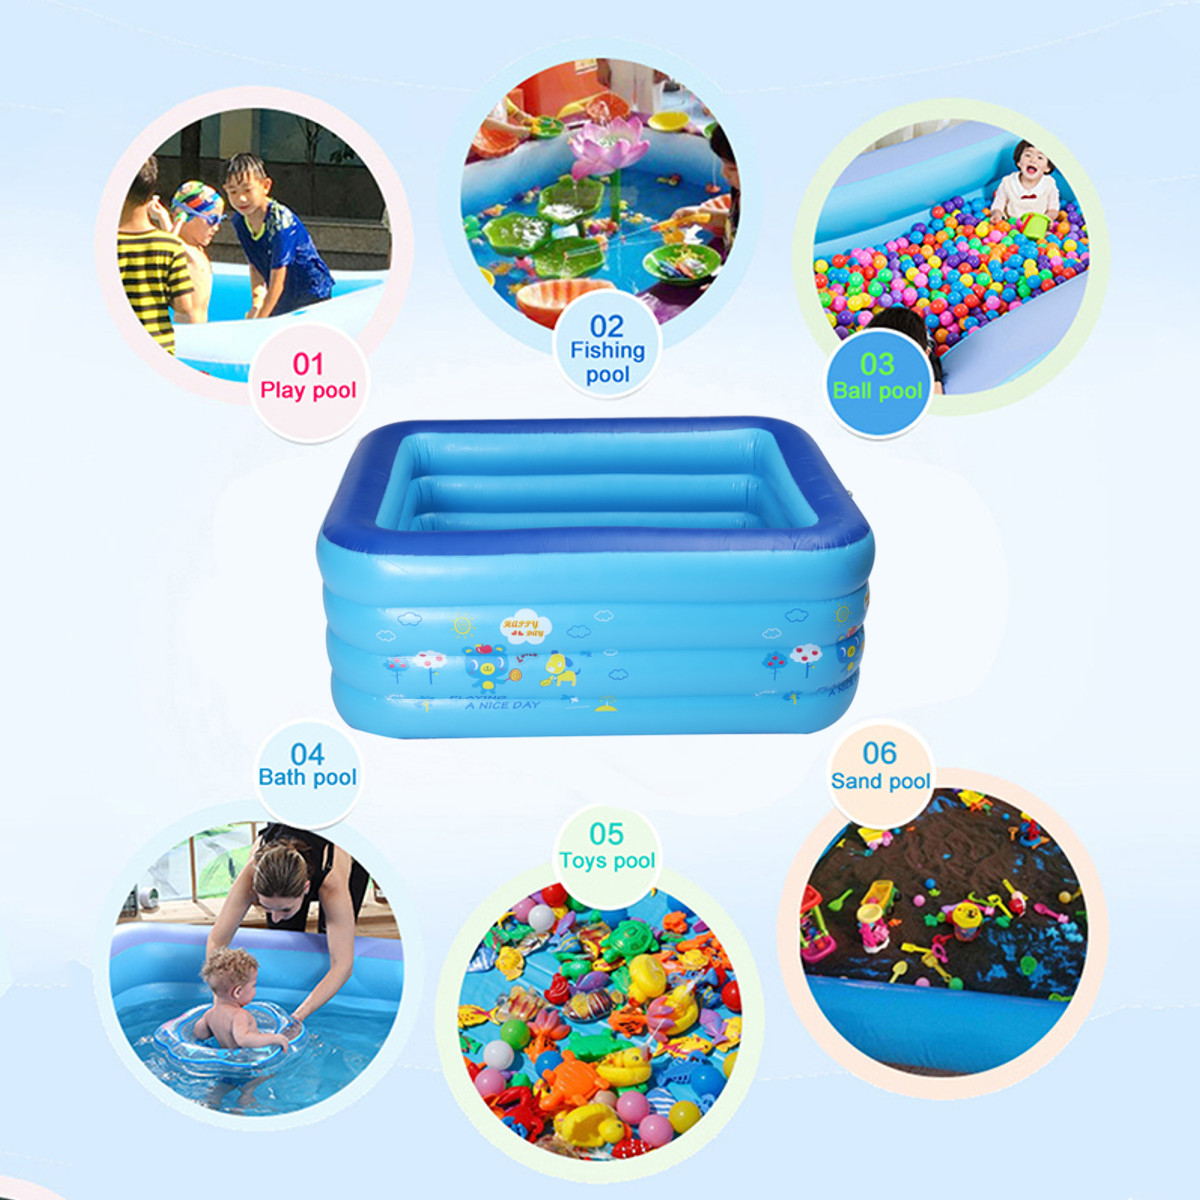 Full-Sized-Family-Inflatable-Swimming-Pool-Thickened-4-Ring-Inflatable-Lounge-Pool-Summer-Backyard-f-1696501-2